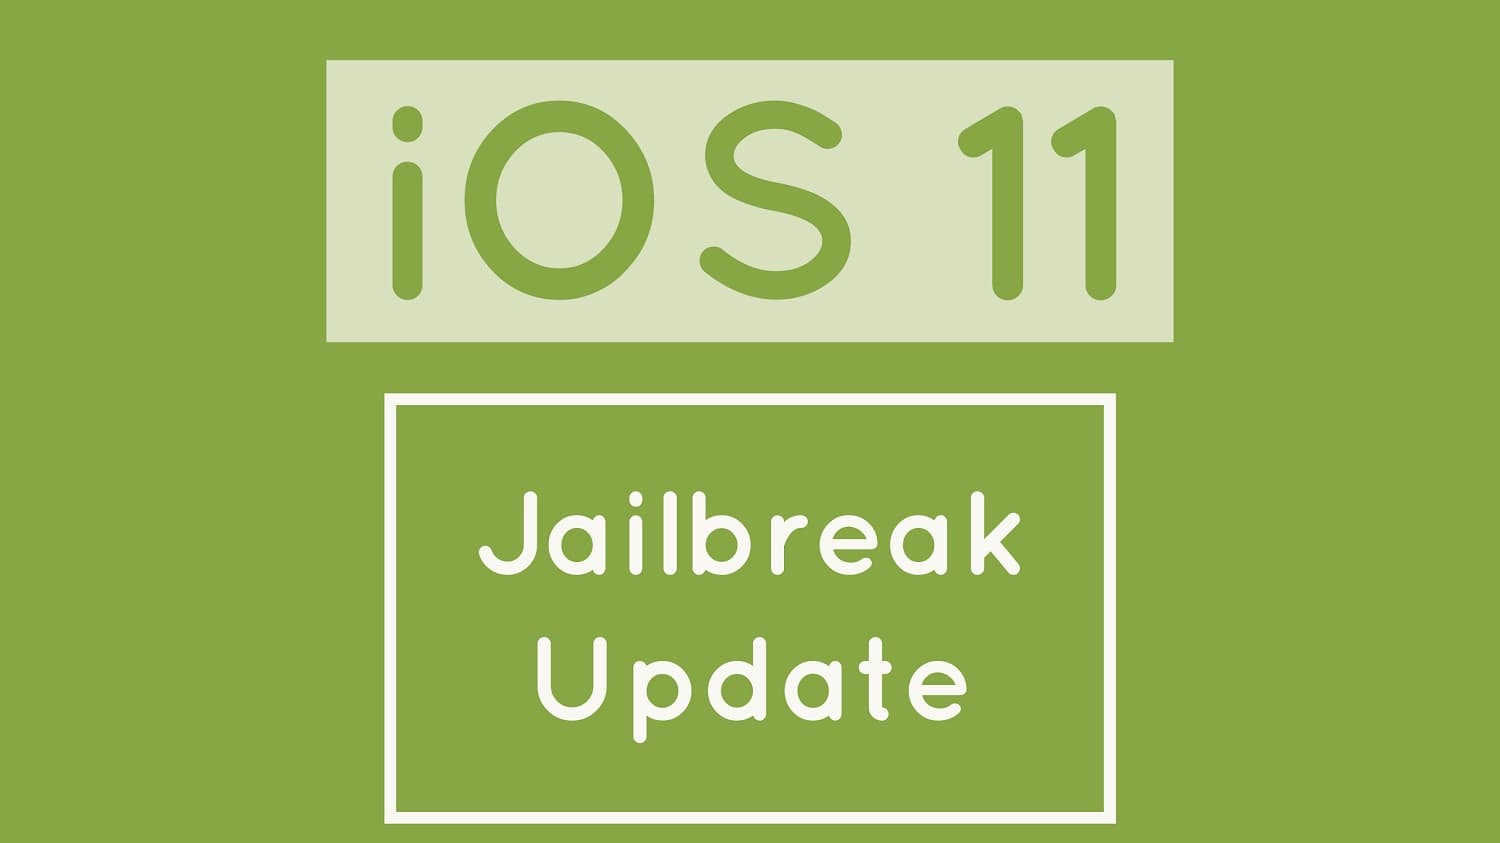 Here is another Christmas gift for you by the Jailbreak developer Jonathan Lavin who has released Jailbreak for iOS 11, 11.0.1, 11.0.2, 11.0.3, 11.1, 11.1.1 and iOS 11.1.2.